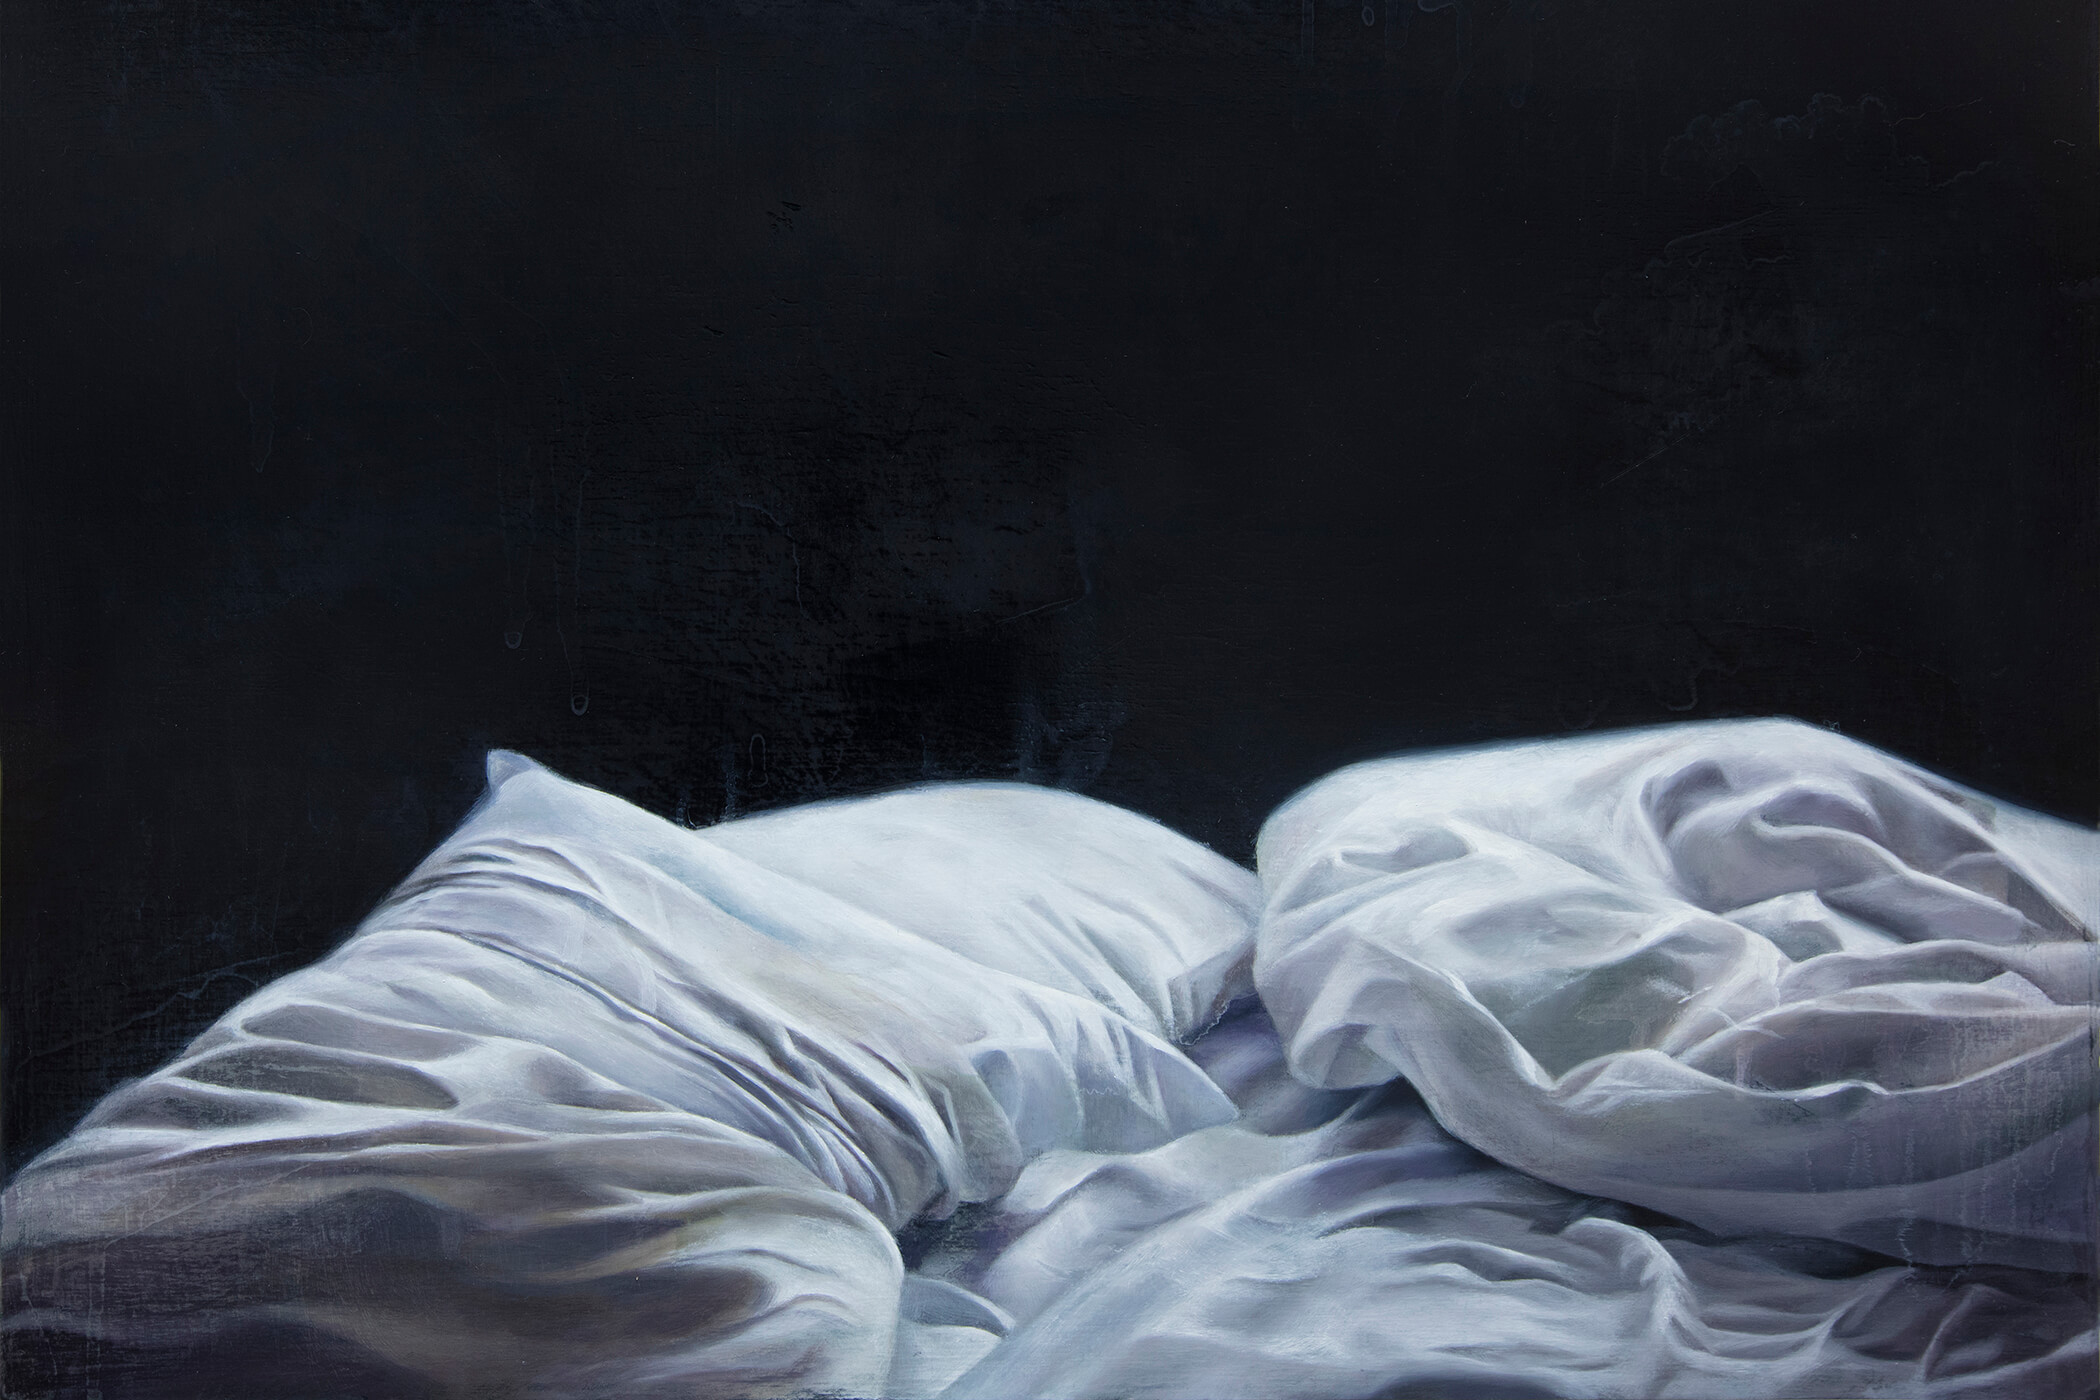 A painting of a portion of an empty bed against a dark black backround. Crumpled pillows and sheets rendered realistically in white and gray. Sheets and pillows indicate someone once slept there.